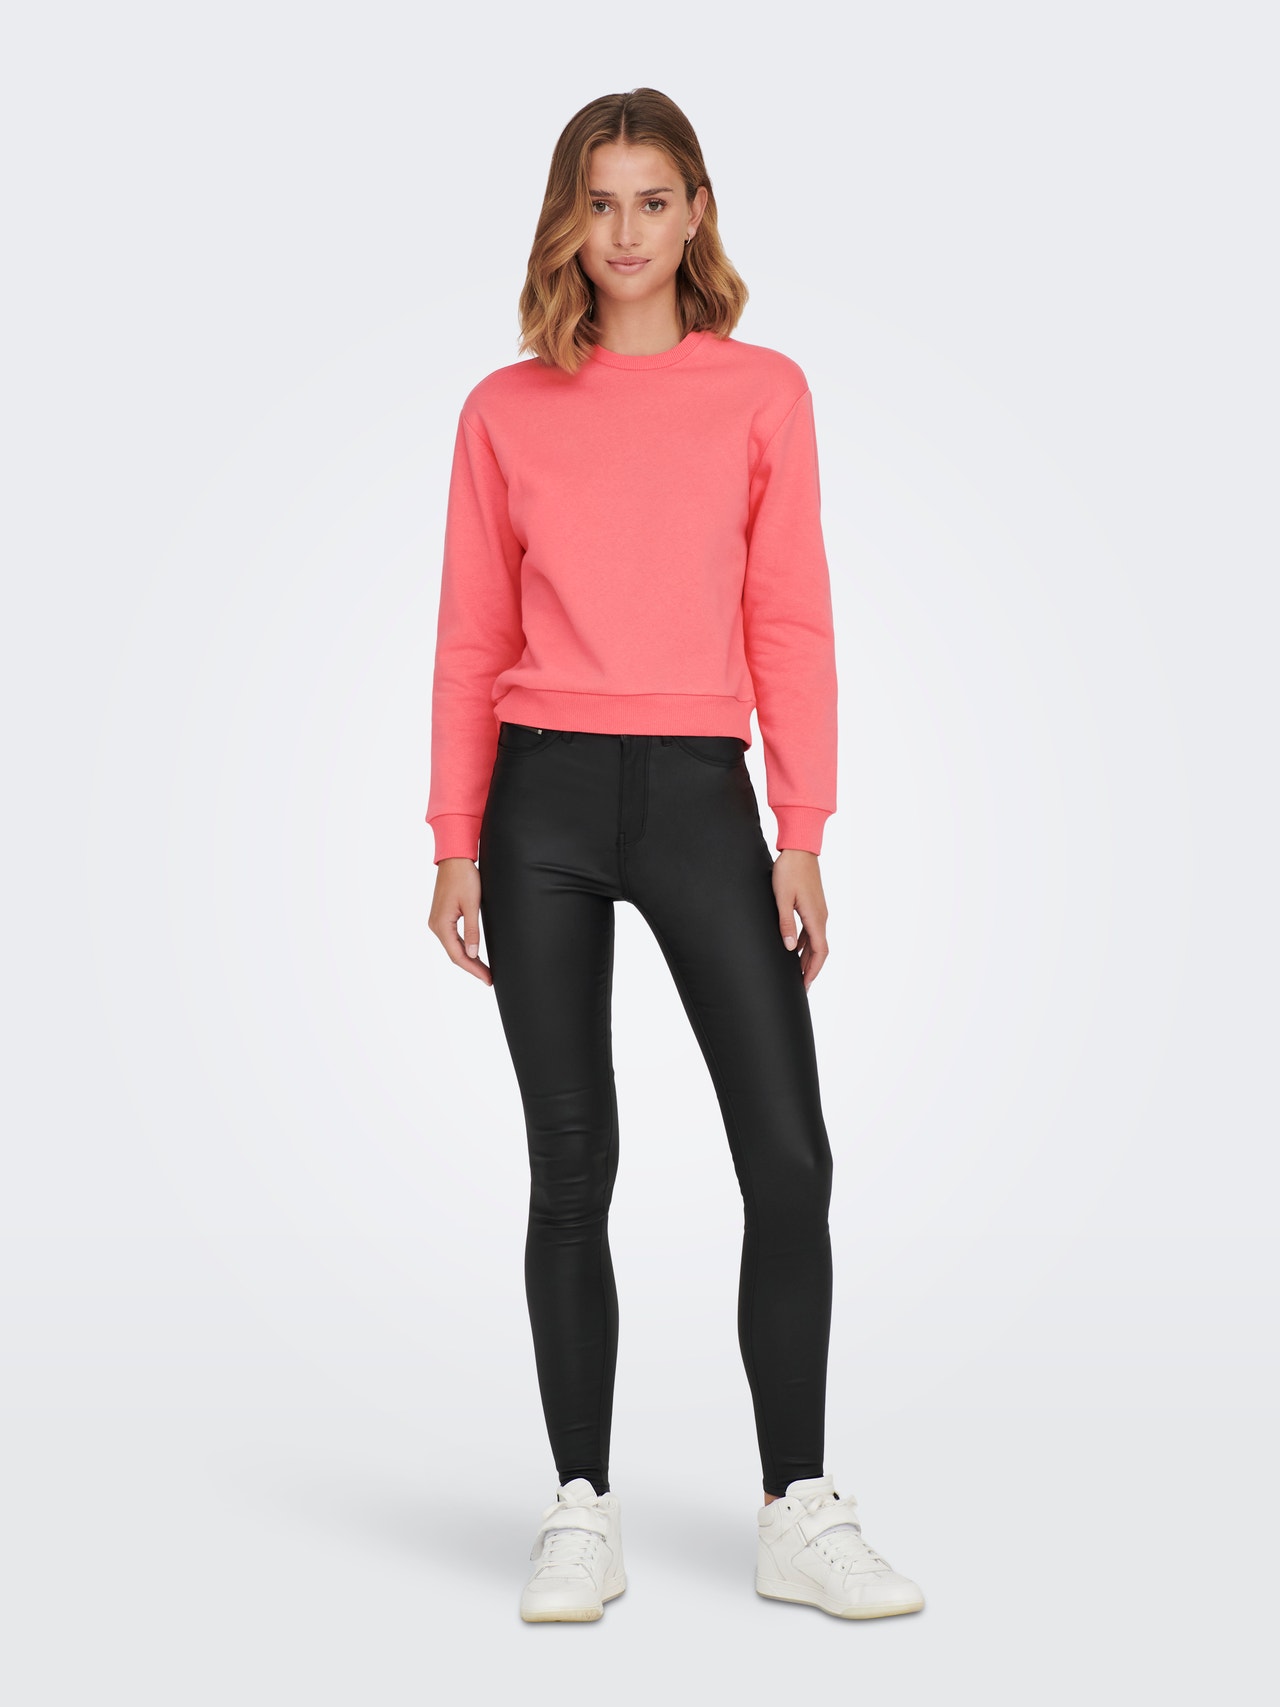 ONLY À manches longues Sweat-shirt -Sugar Coral - 15289279